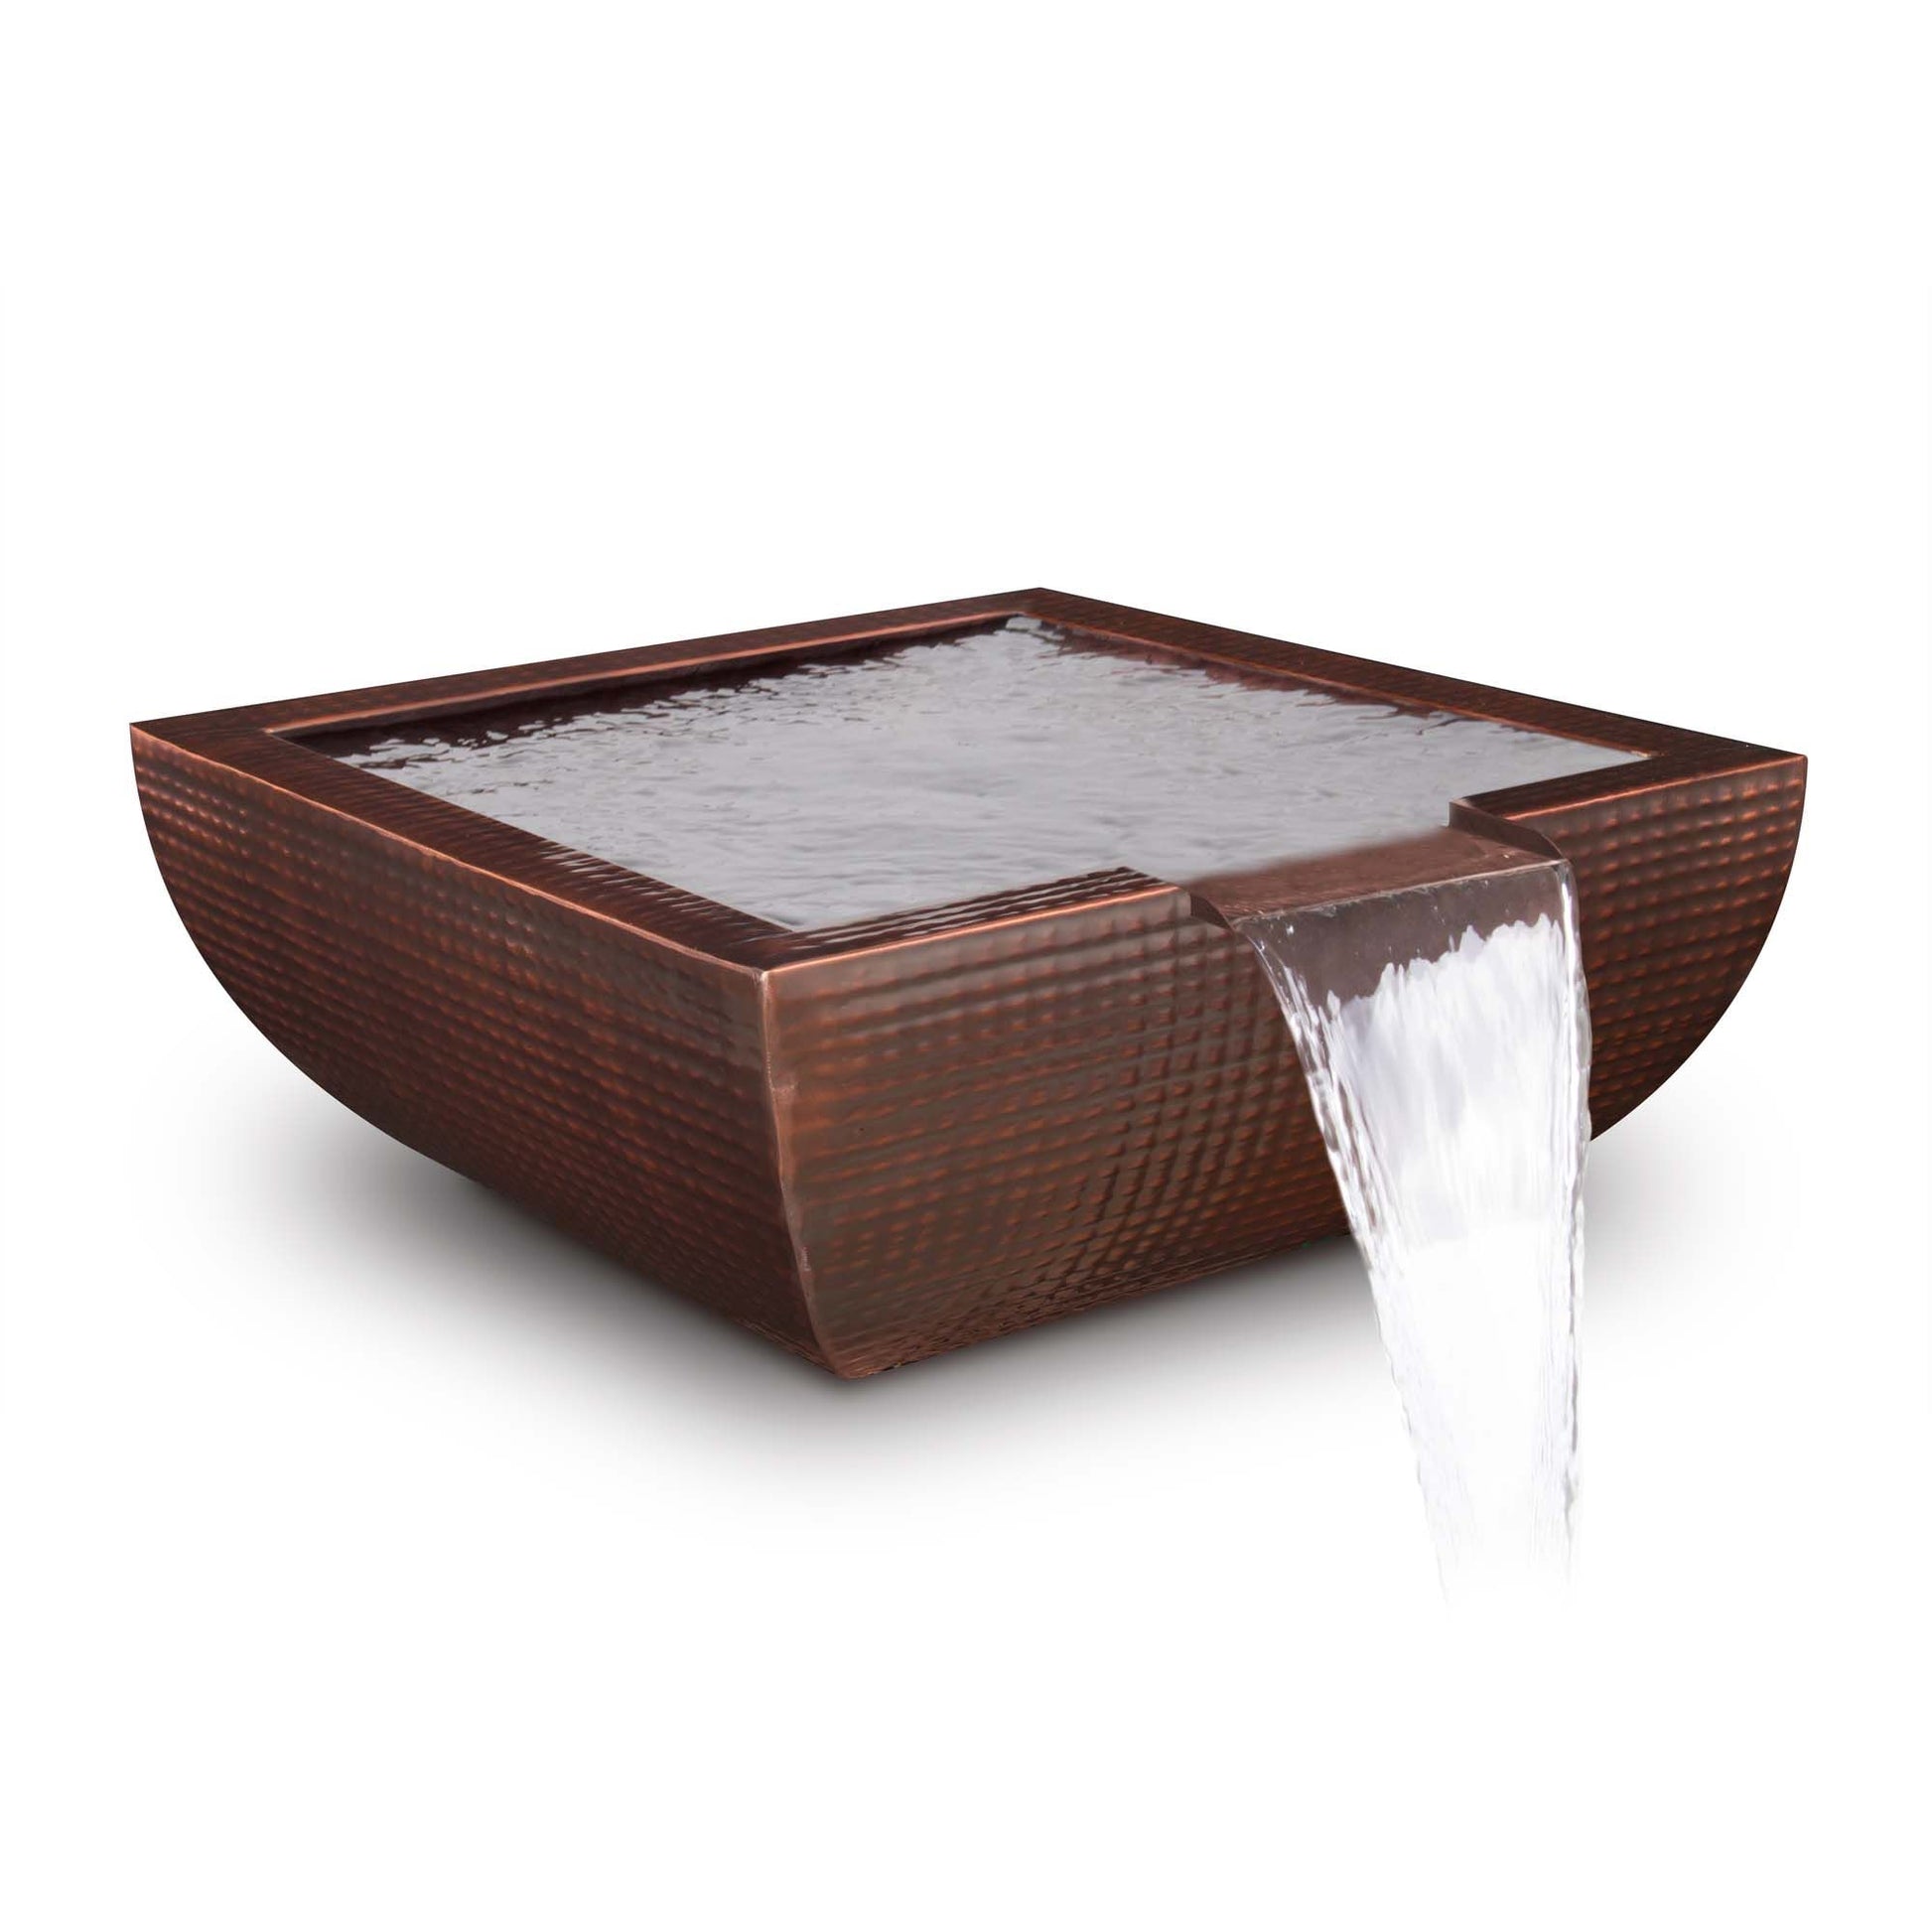 The Outdoor Plus Avalon Hammered Copper Water Bowl - OPT-AVCPWO freeshipping - Luxury Tech Inc.